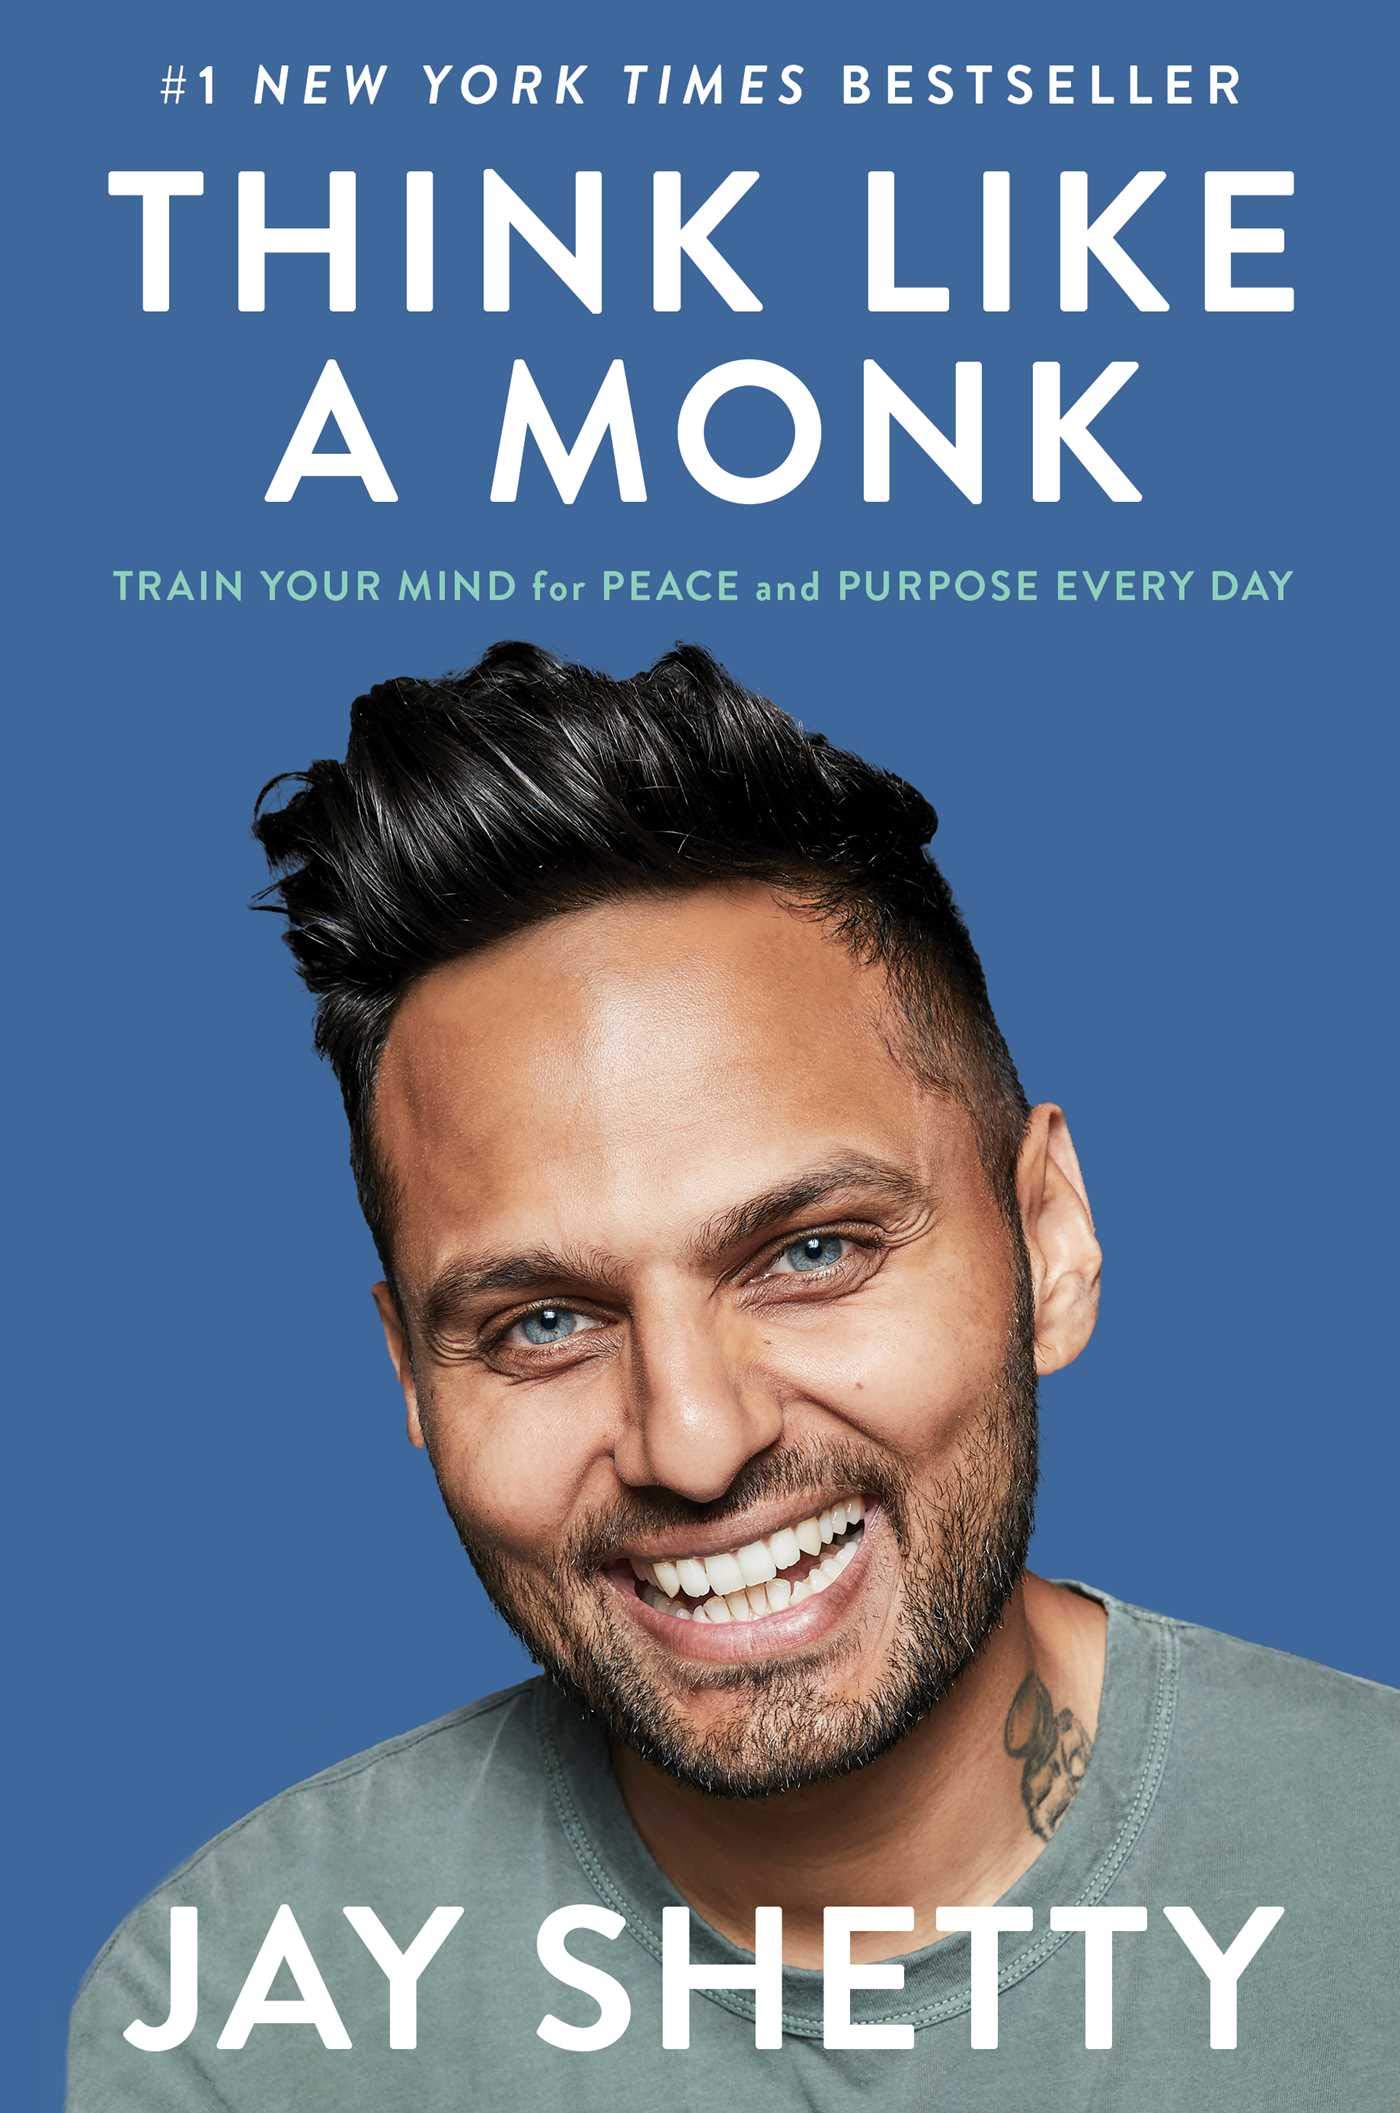 Image for "Think Like a Monk"